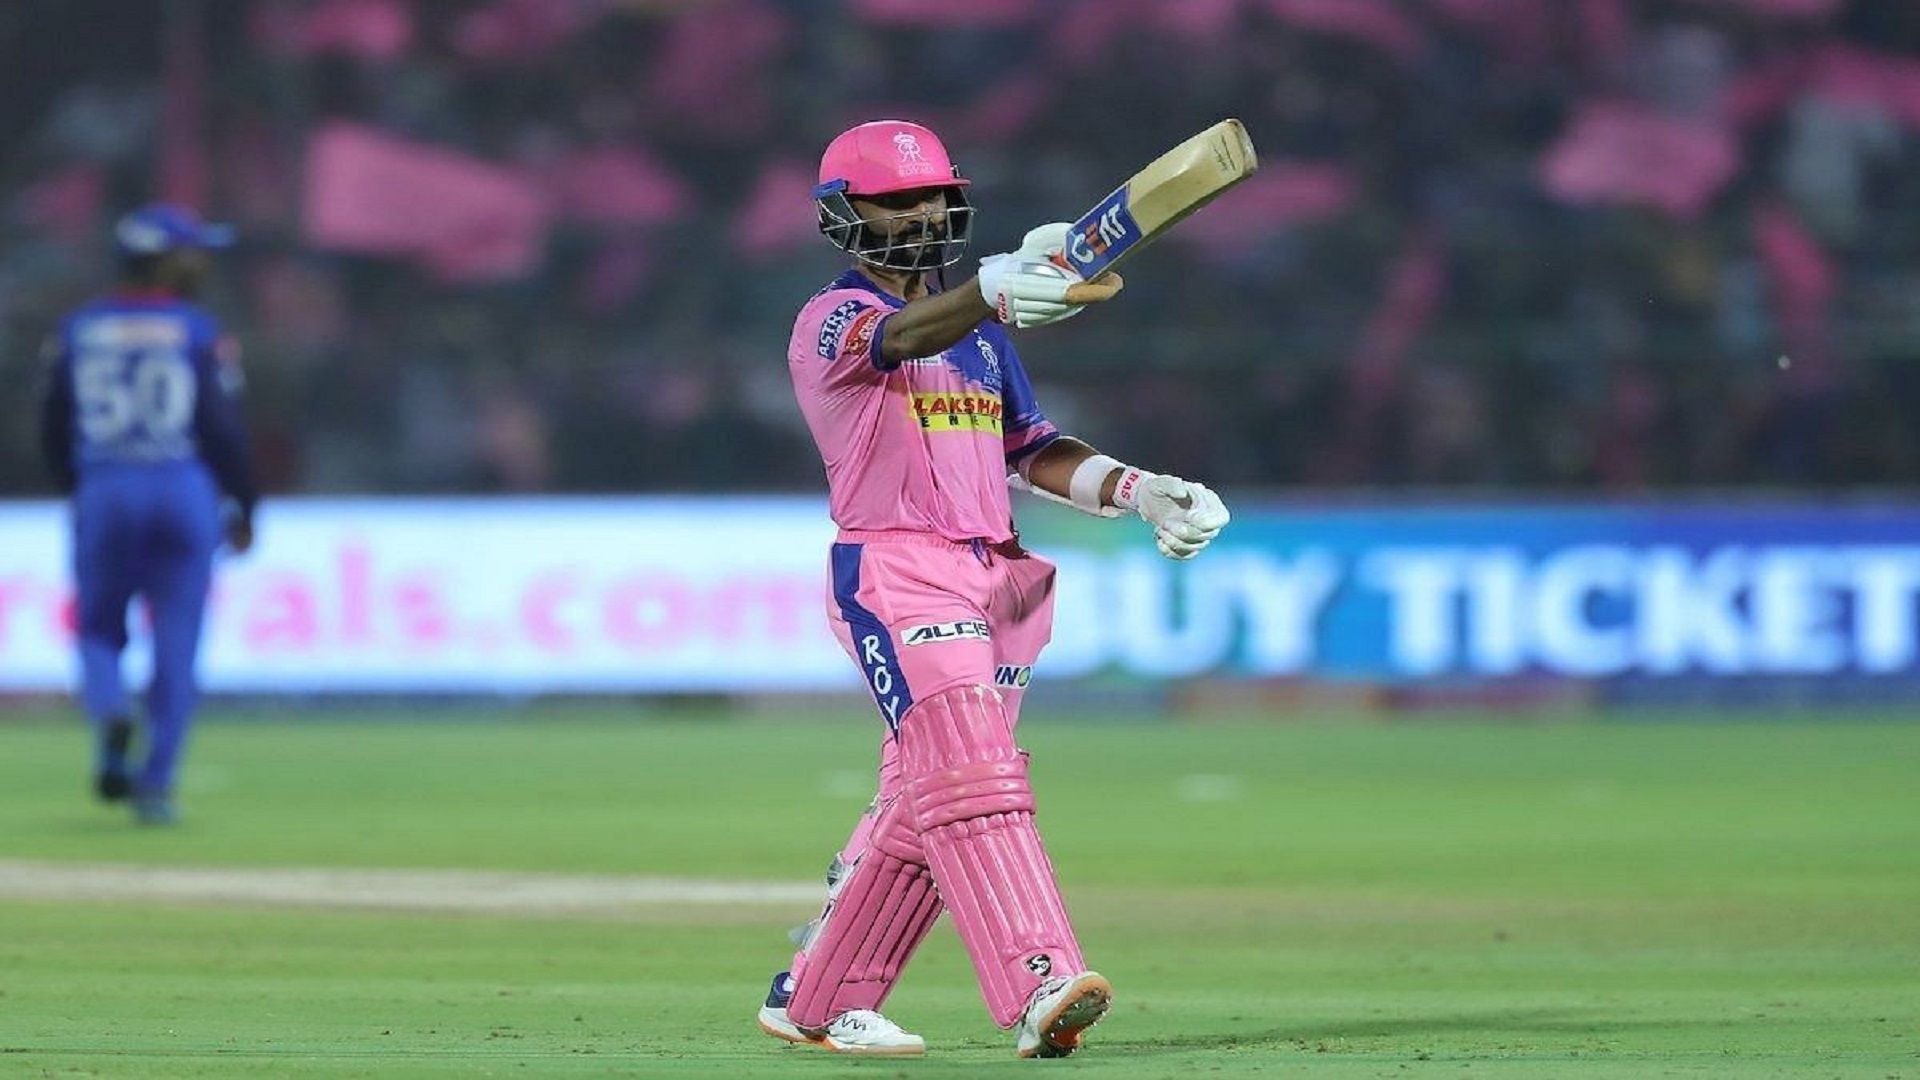 Ajinkya Rahane scored two centuries in the IPL for the Rajasthan Royals